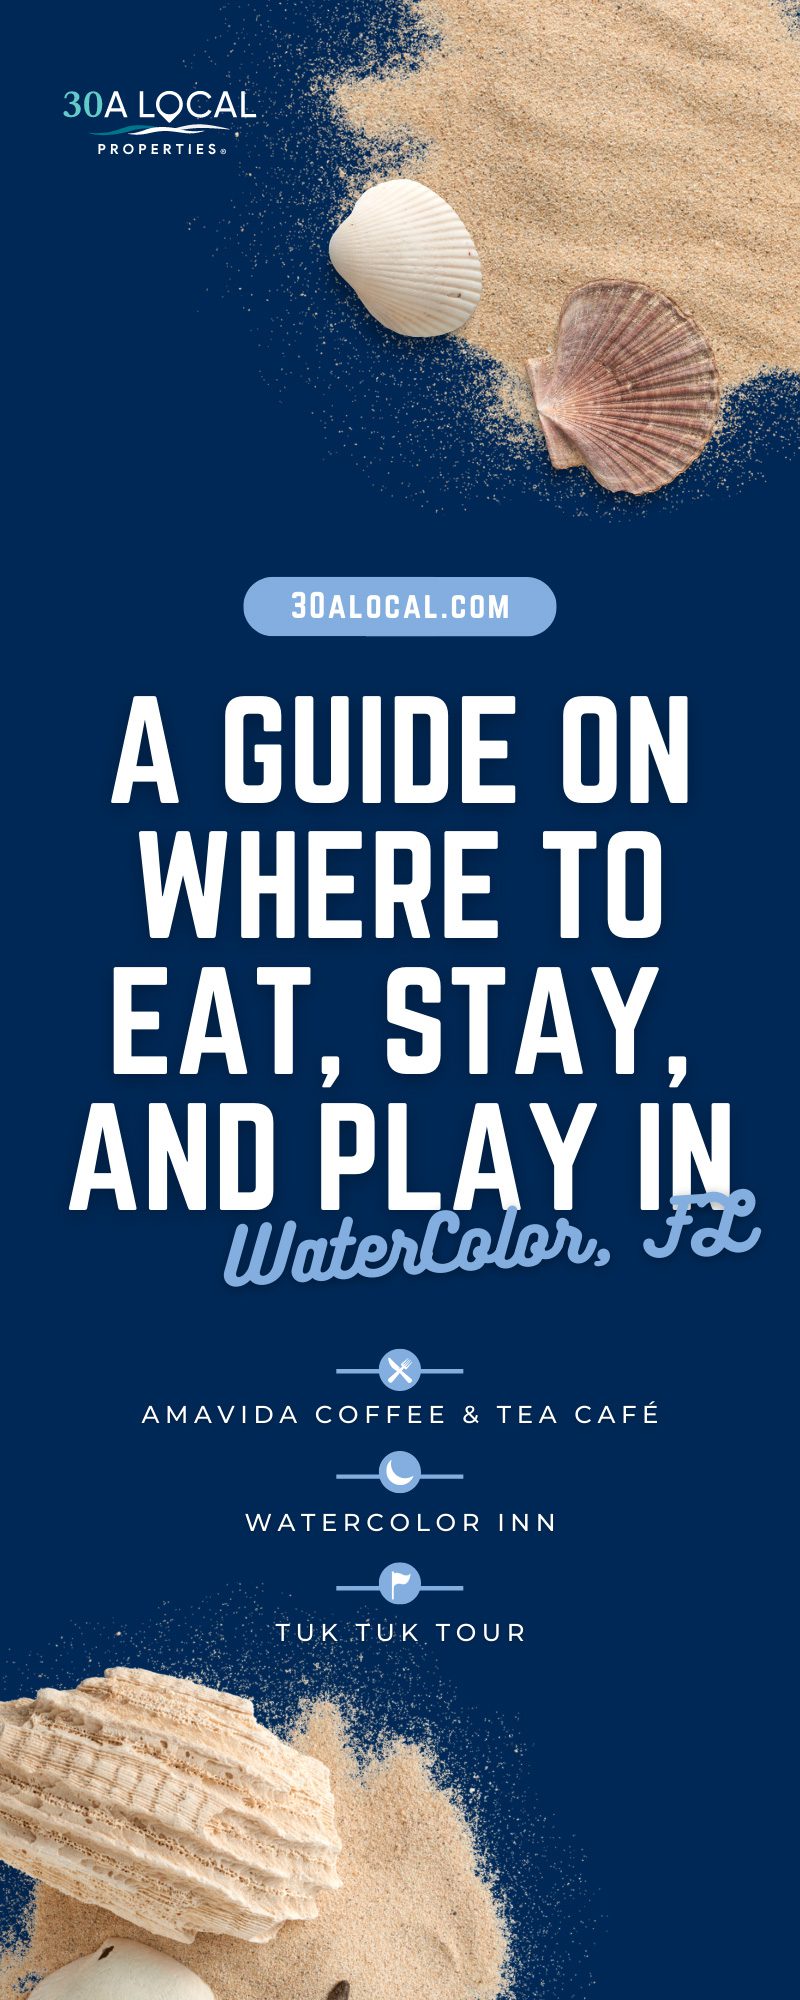 A Guide on Where To Eat, Stay, and Play in WaterColor, FL